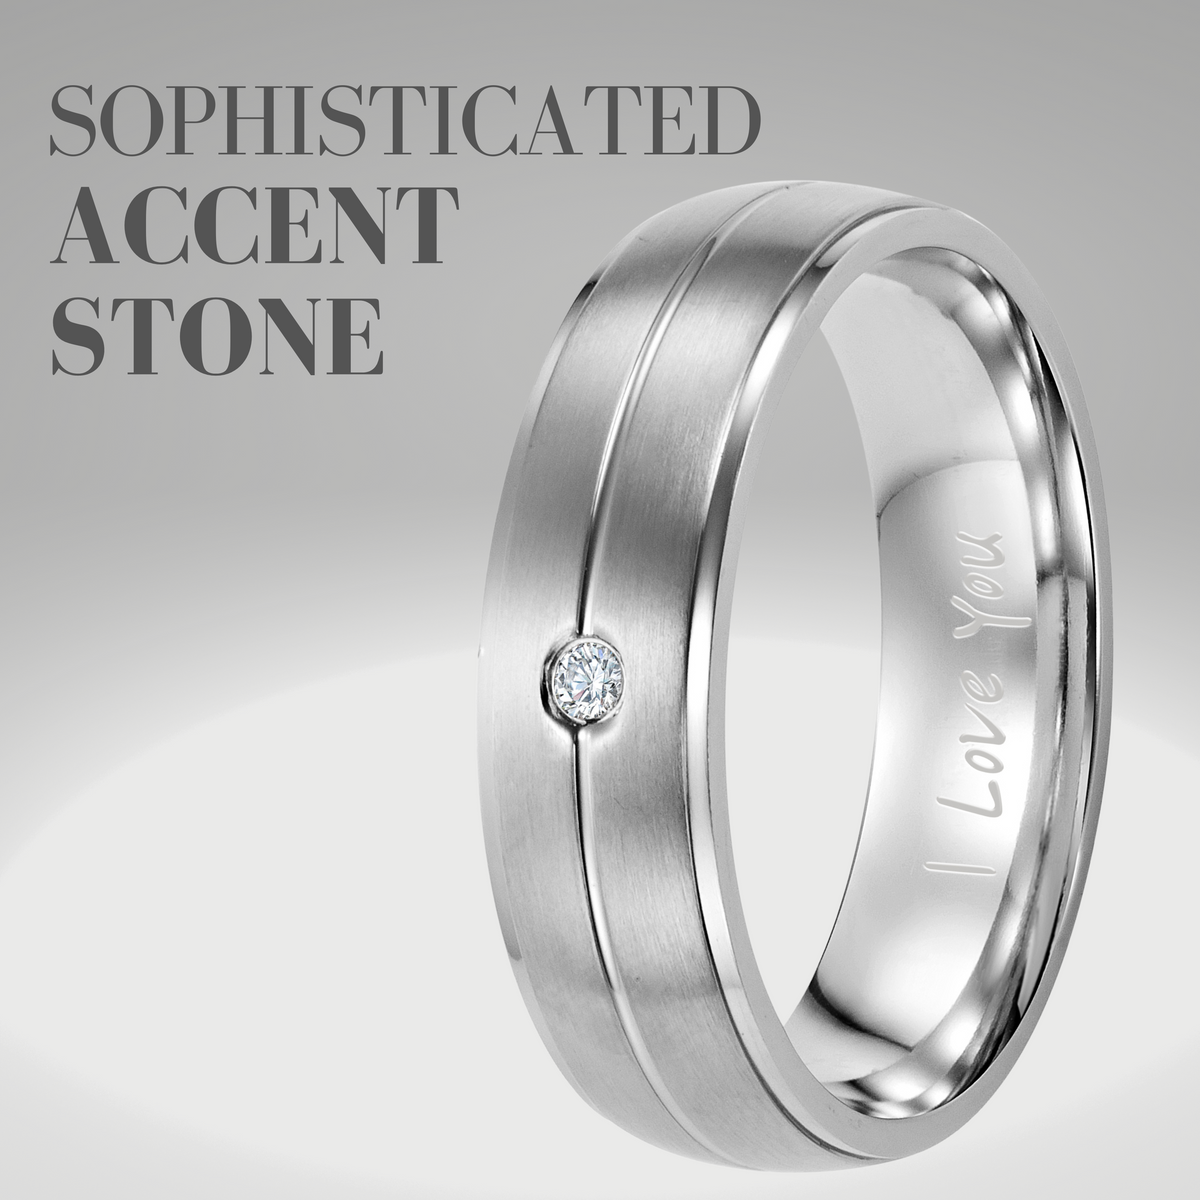 Mens Titanium Ring Engraved I Love You with CZ Stone